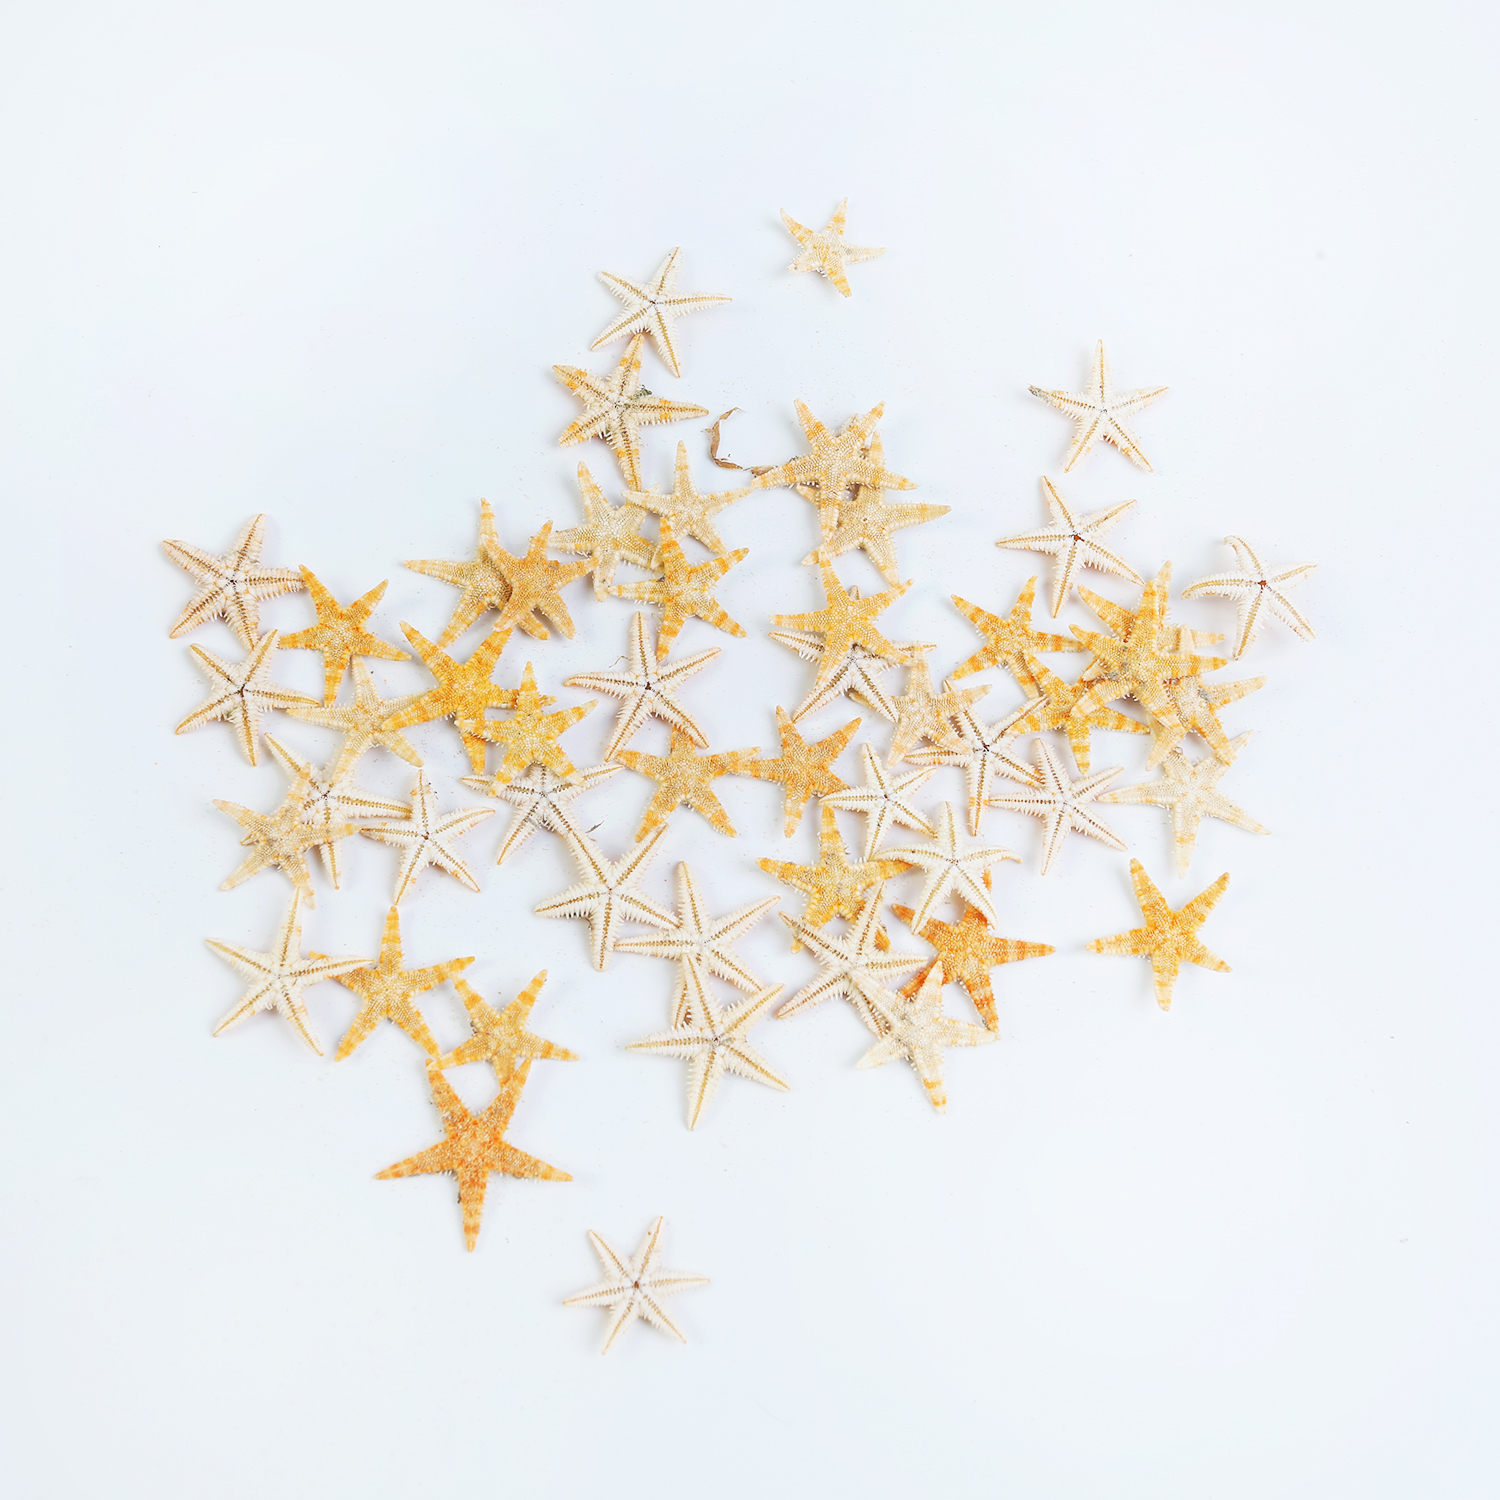 50 Small Sun Star Fish Shells Pack for Craft and Beach Decor 1cm